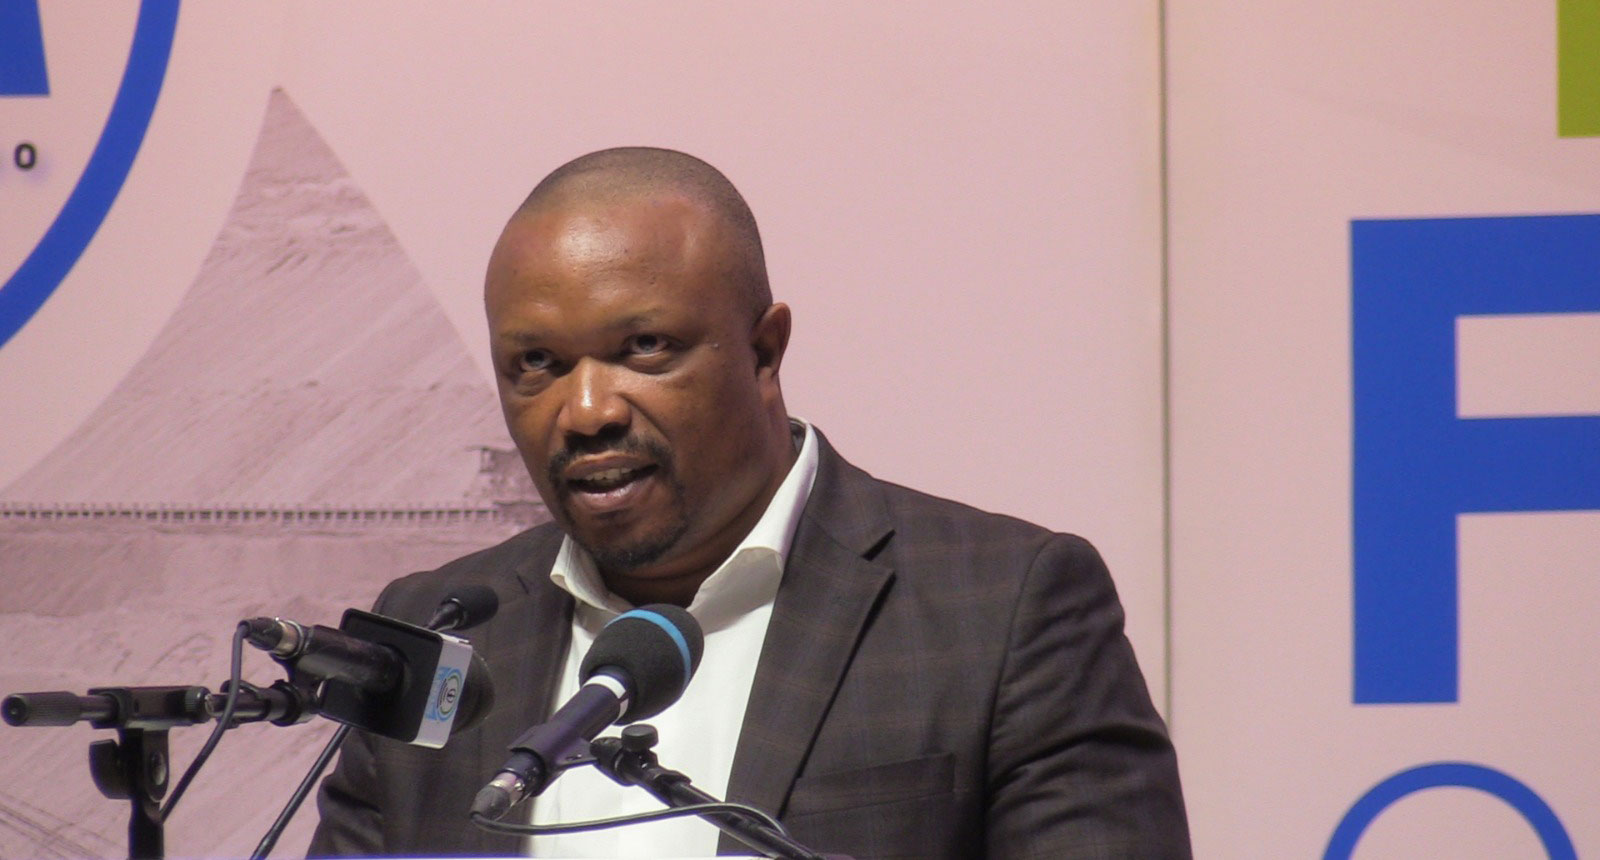 Mining conference looks to open doors for Lesotho